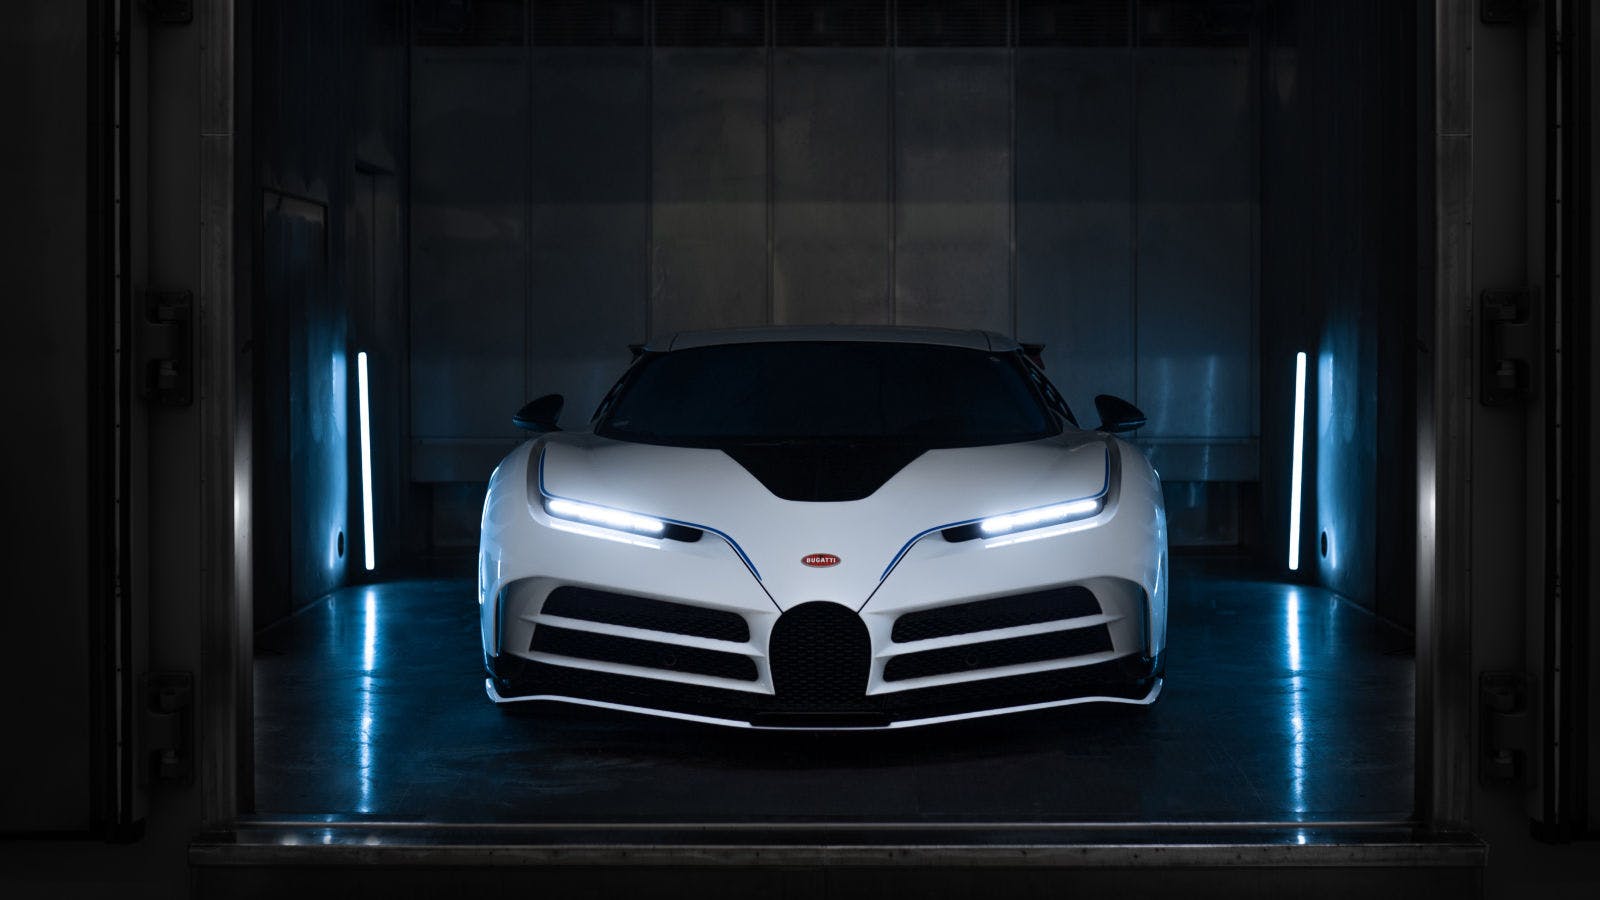 Bugatti Centodieci – Tested to Minus 20 Degrees Celsius in the Climate Chamber